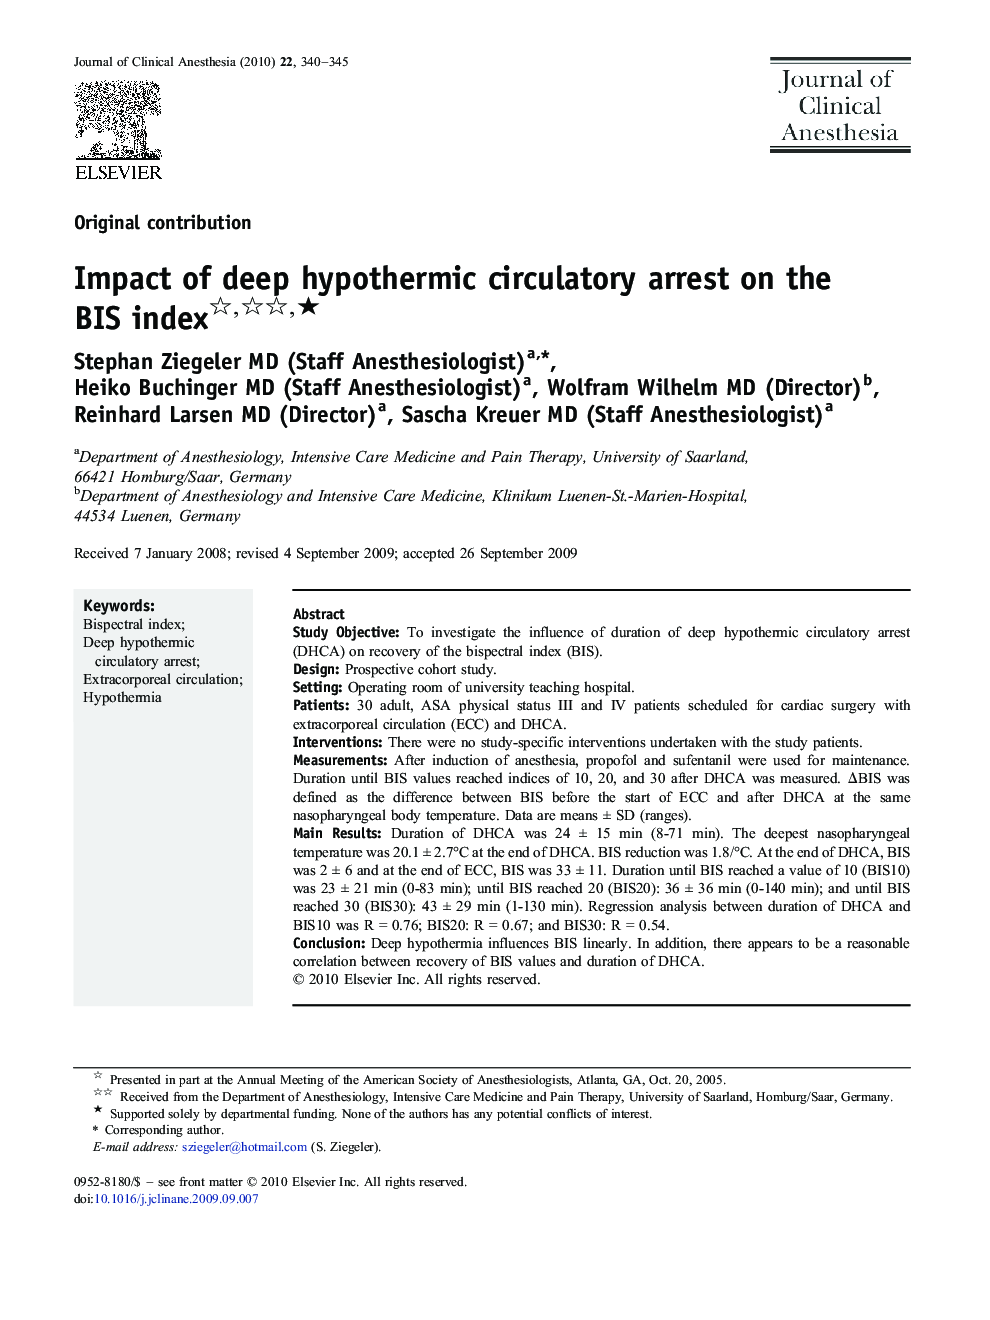 Impact of deep hypothermic circulatory arrest on the BIS index